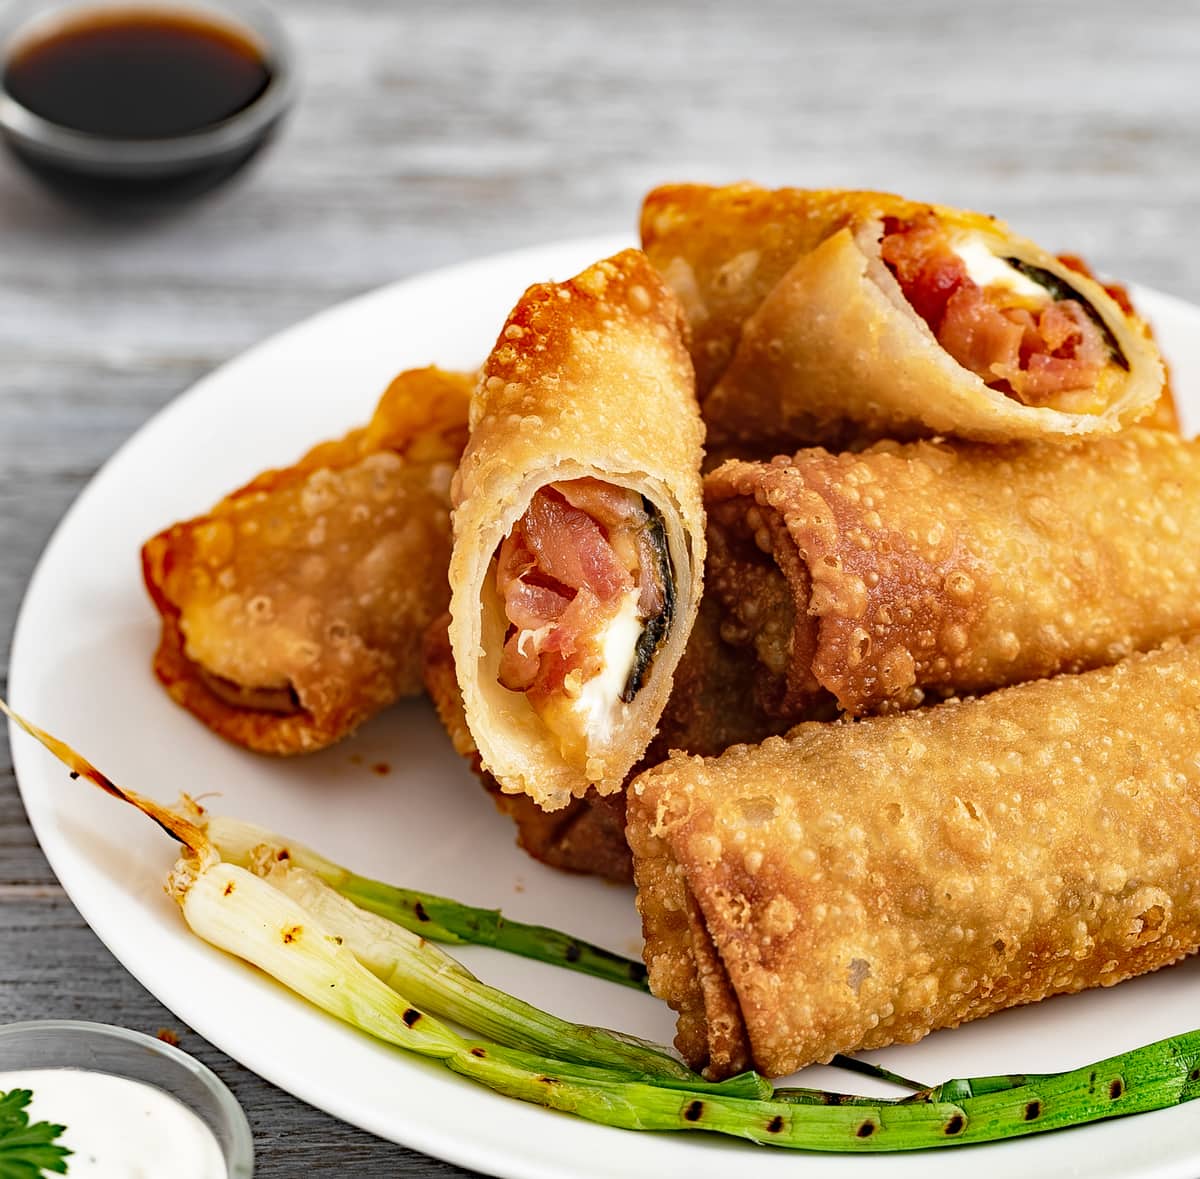 Plate of eggrolls with grill scallon.